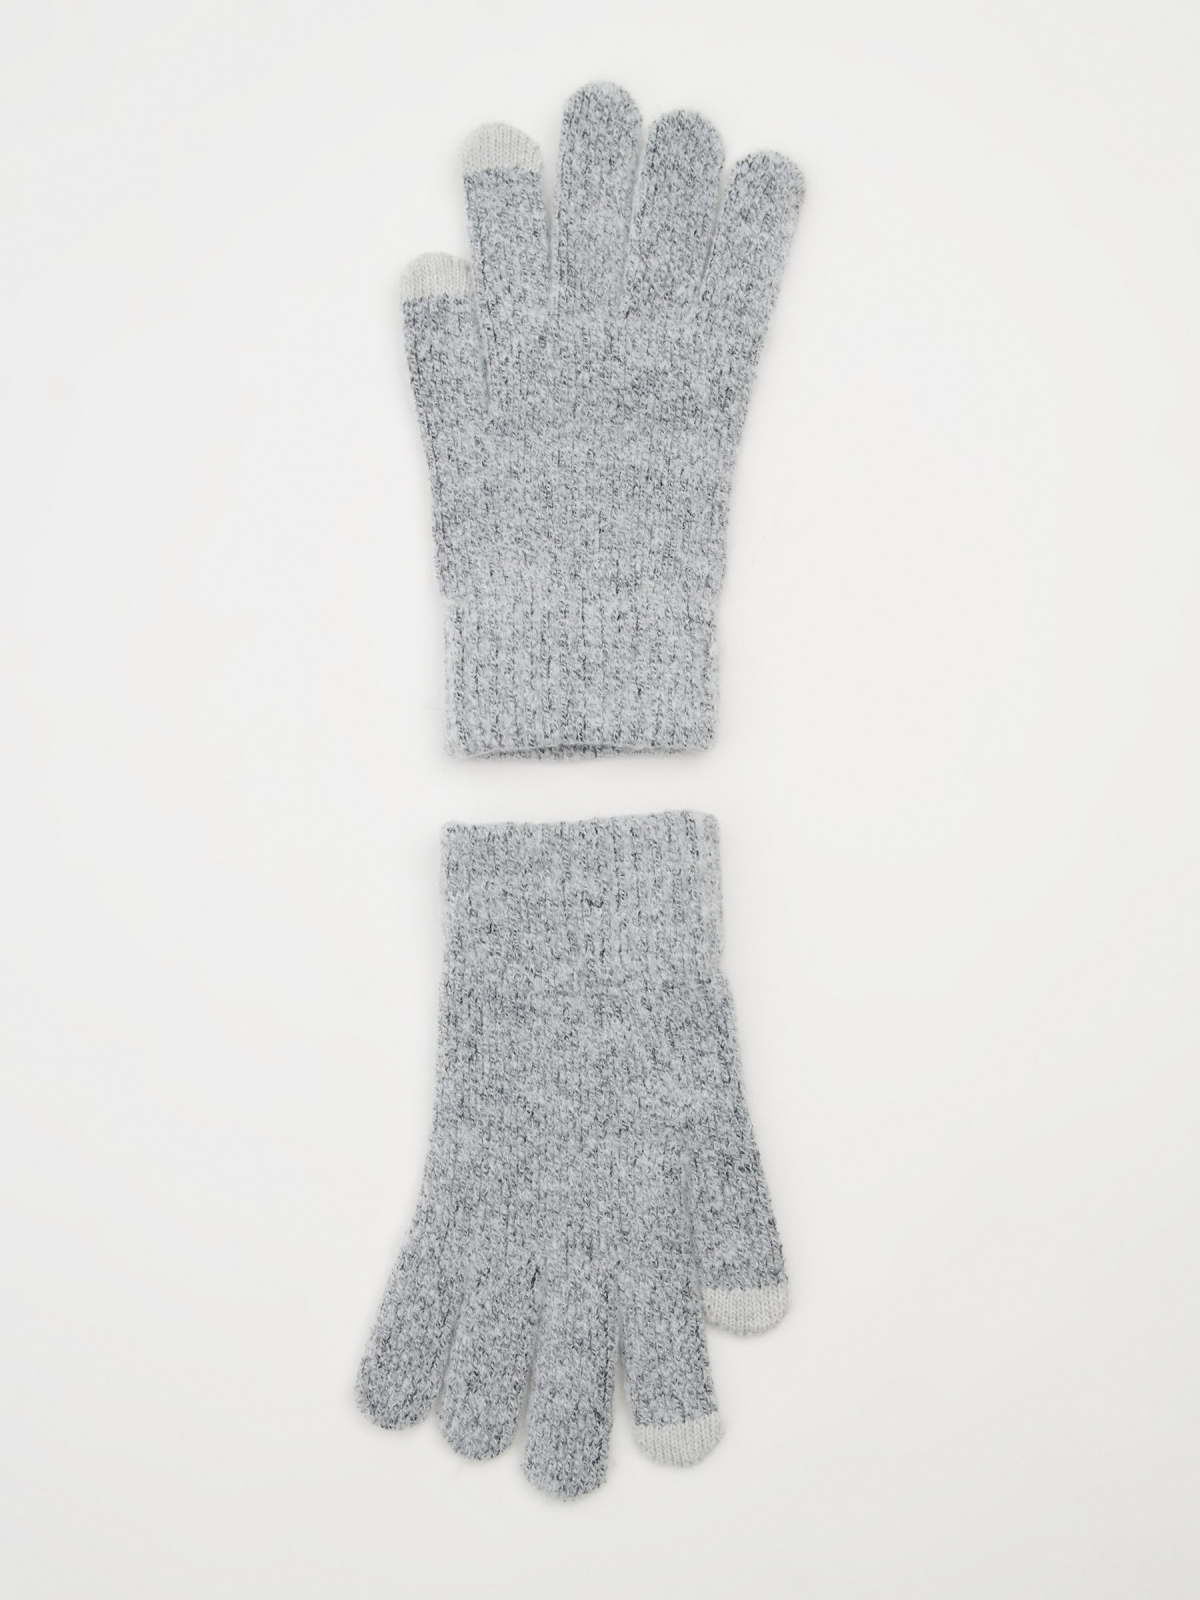 Marbled tactile glove grey aerial view